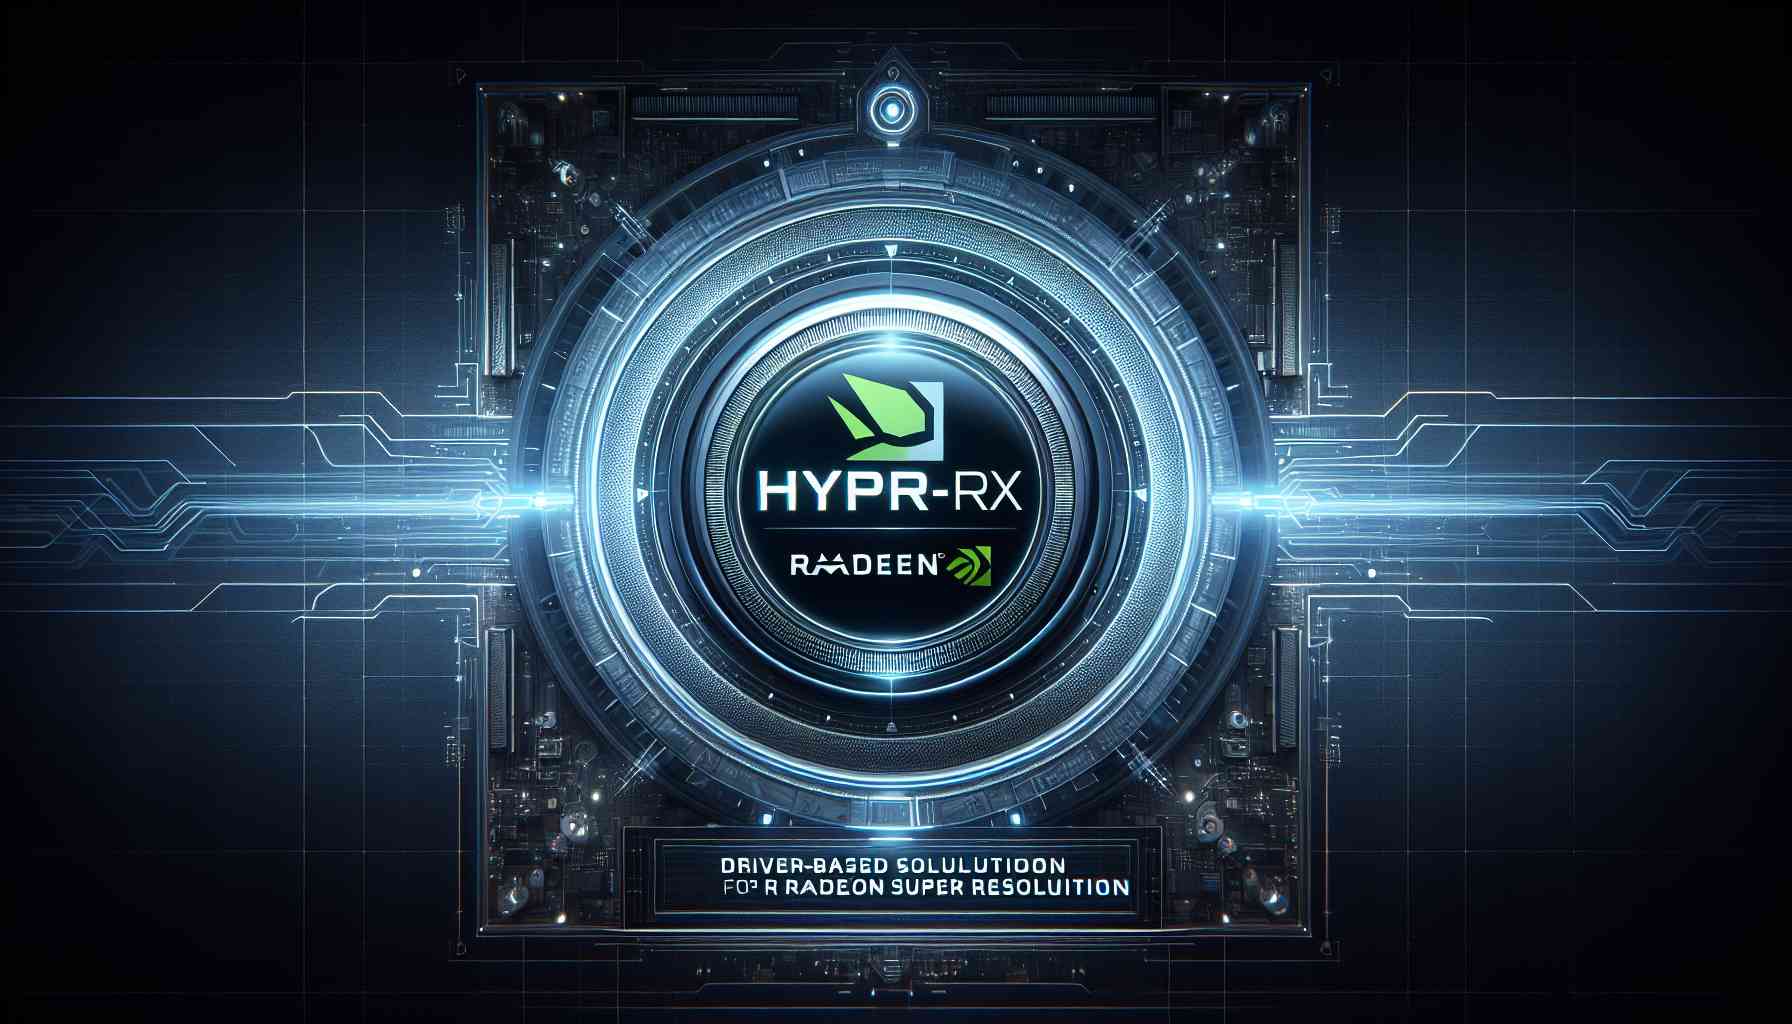 AMD Introduces HYPR-RX: The Driver-Based Solution for Radeon Super Resolution